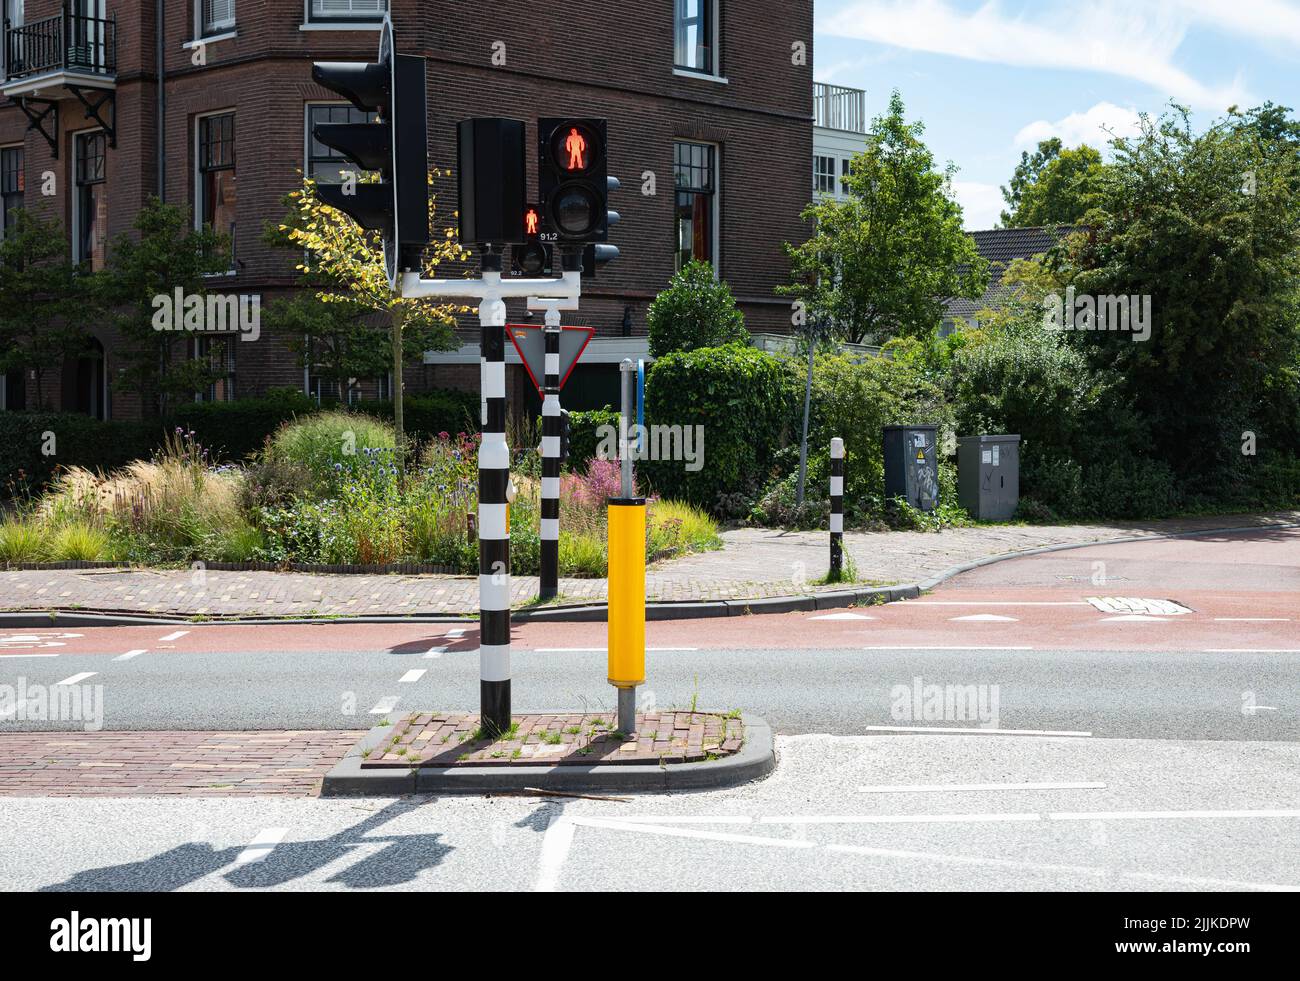 Traffic light that is red for pedestrians in Haarlem, the Netherlands. There are no people or trademarks in the shot. Stock Photo